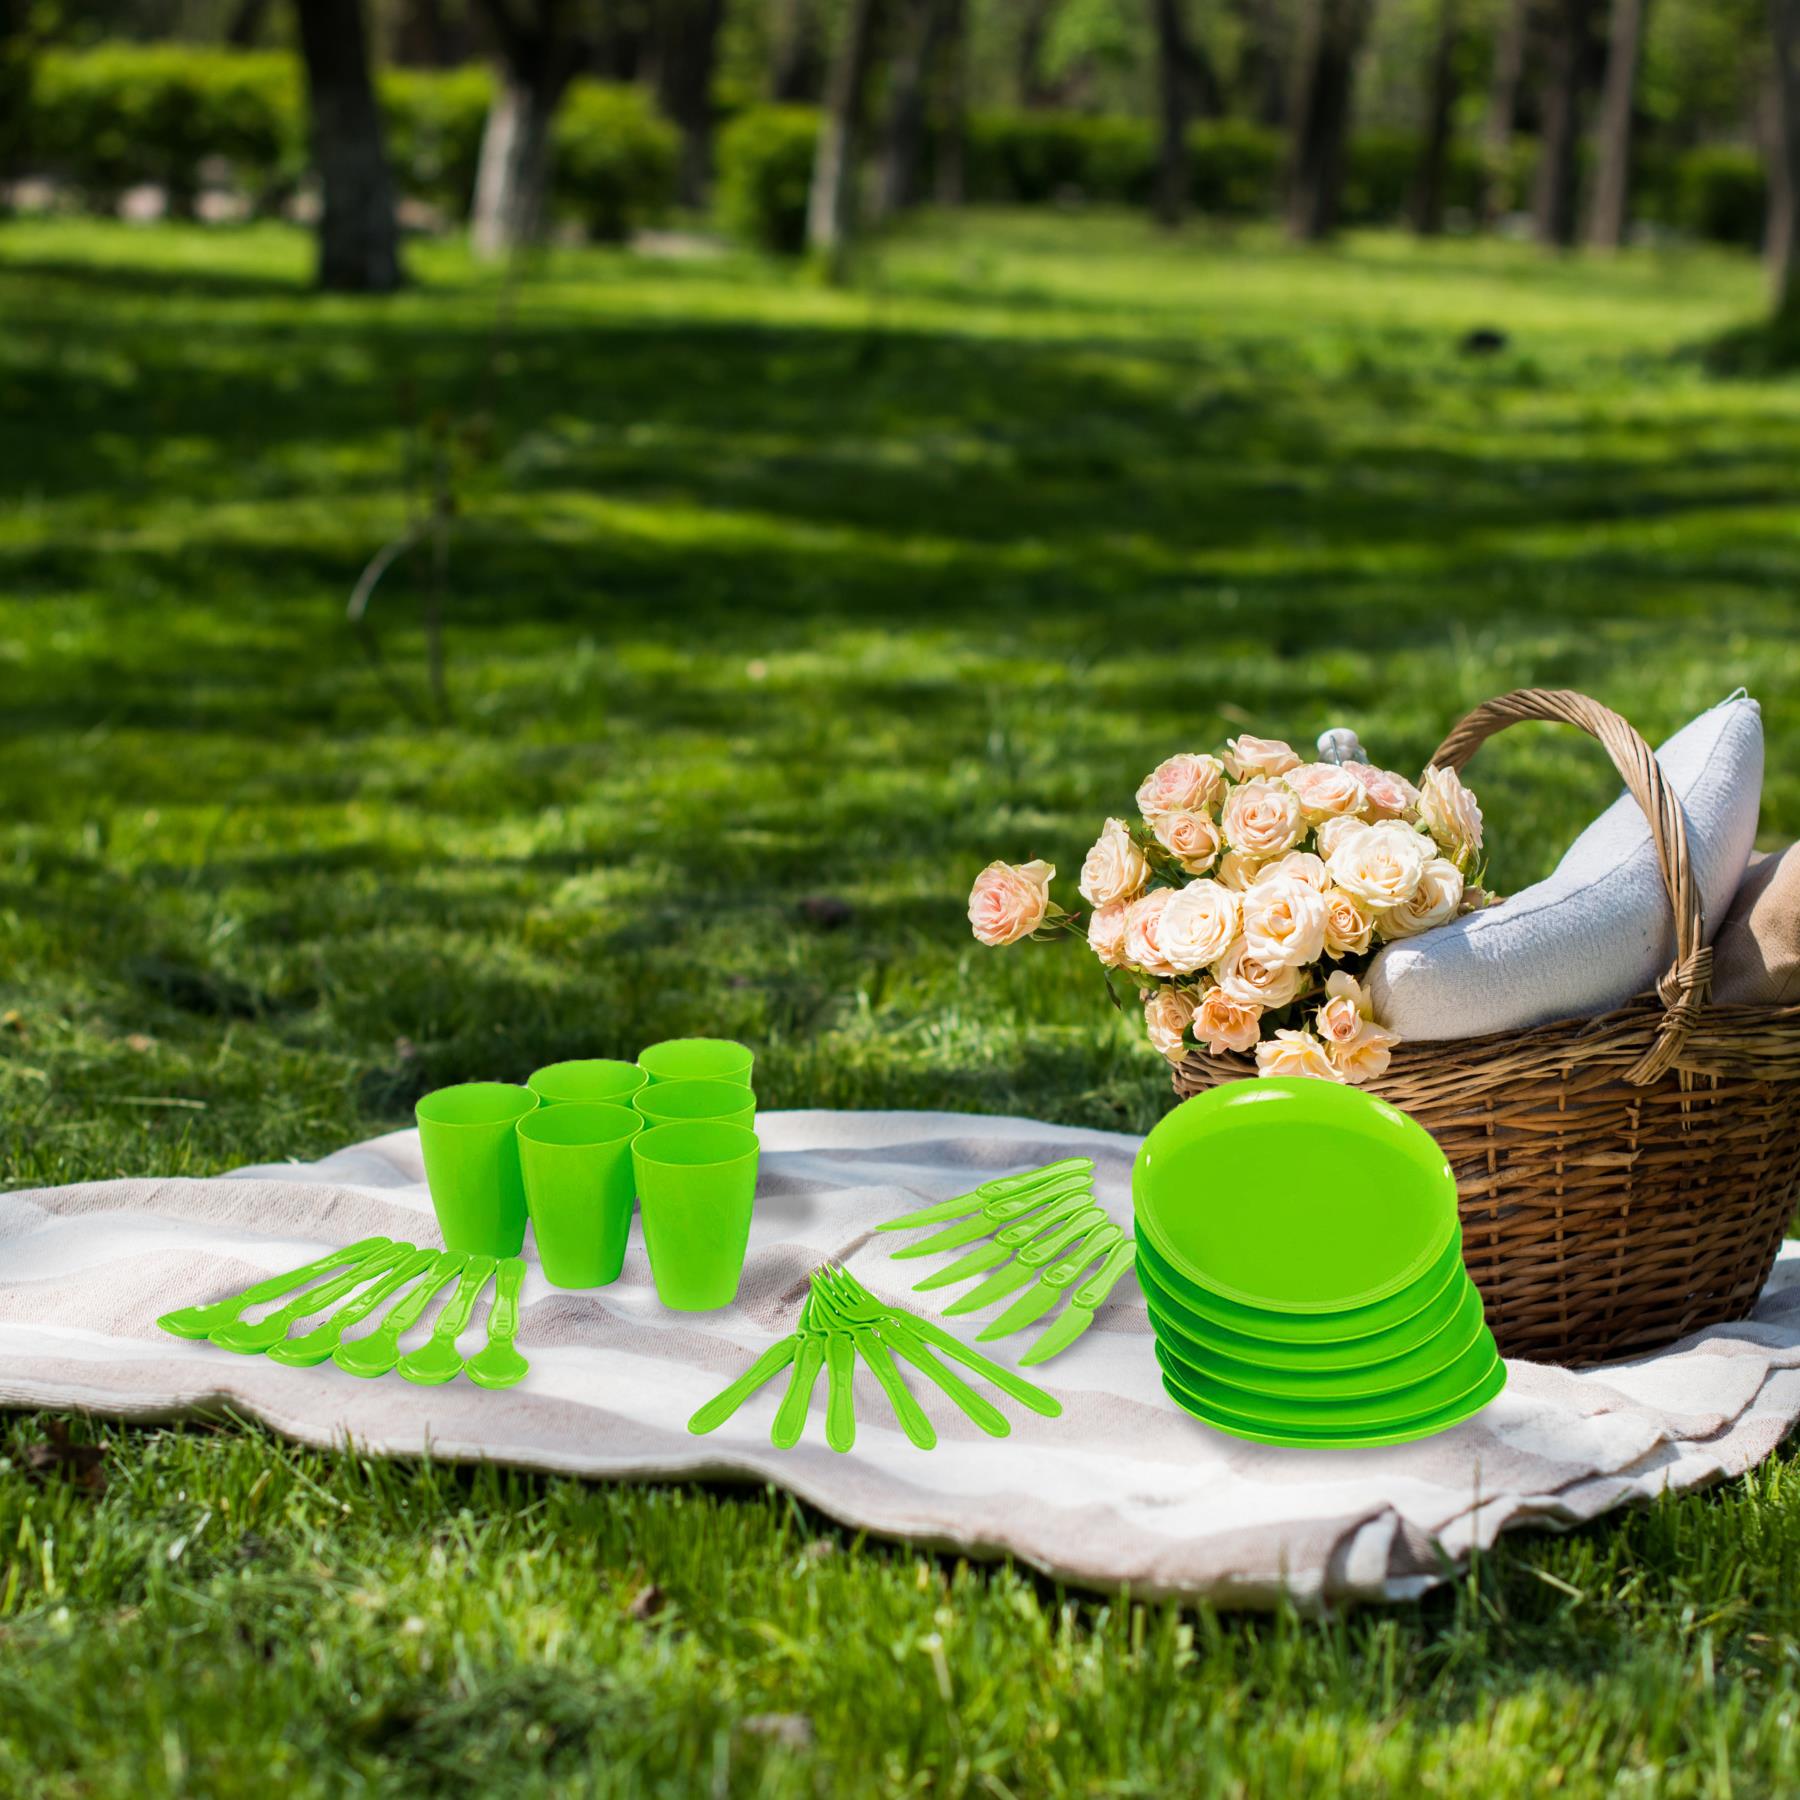 Green Camping Set For Six [31 Pieces] by Geezy - The Magic Toy Shop